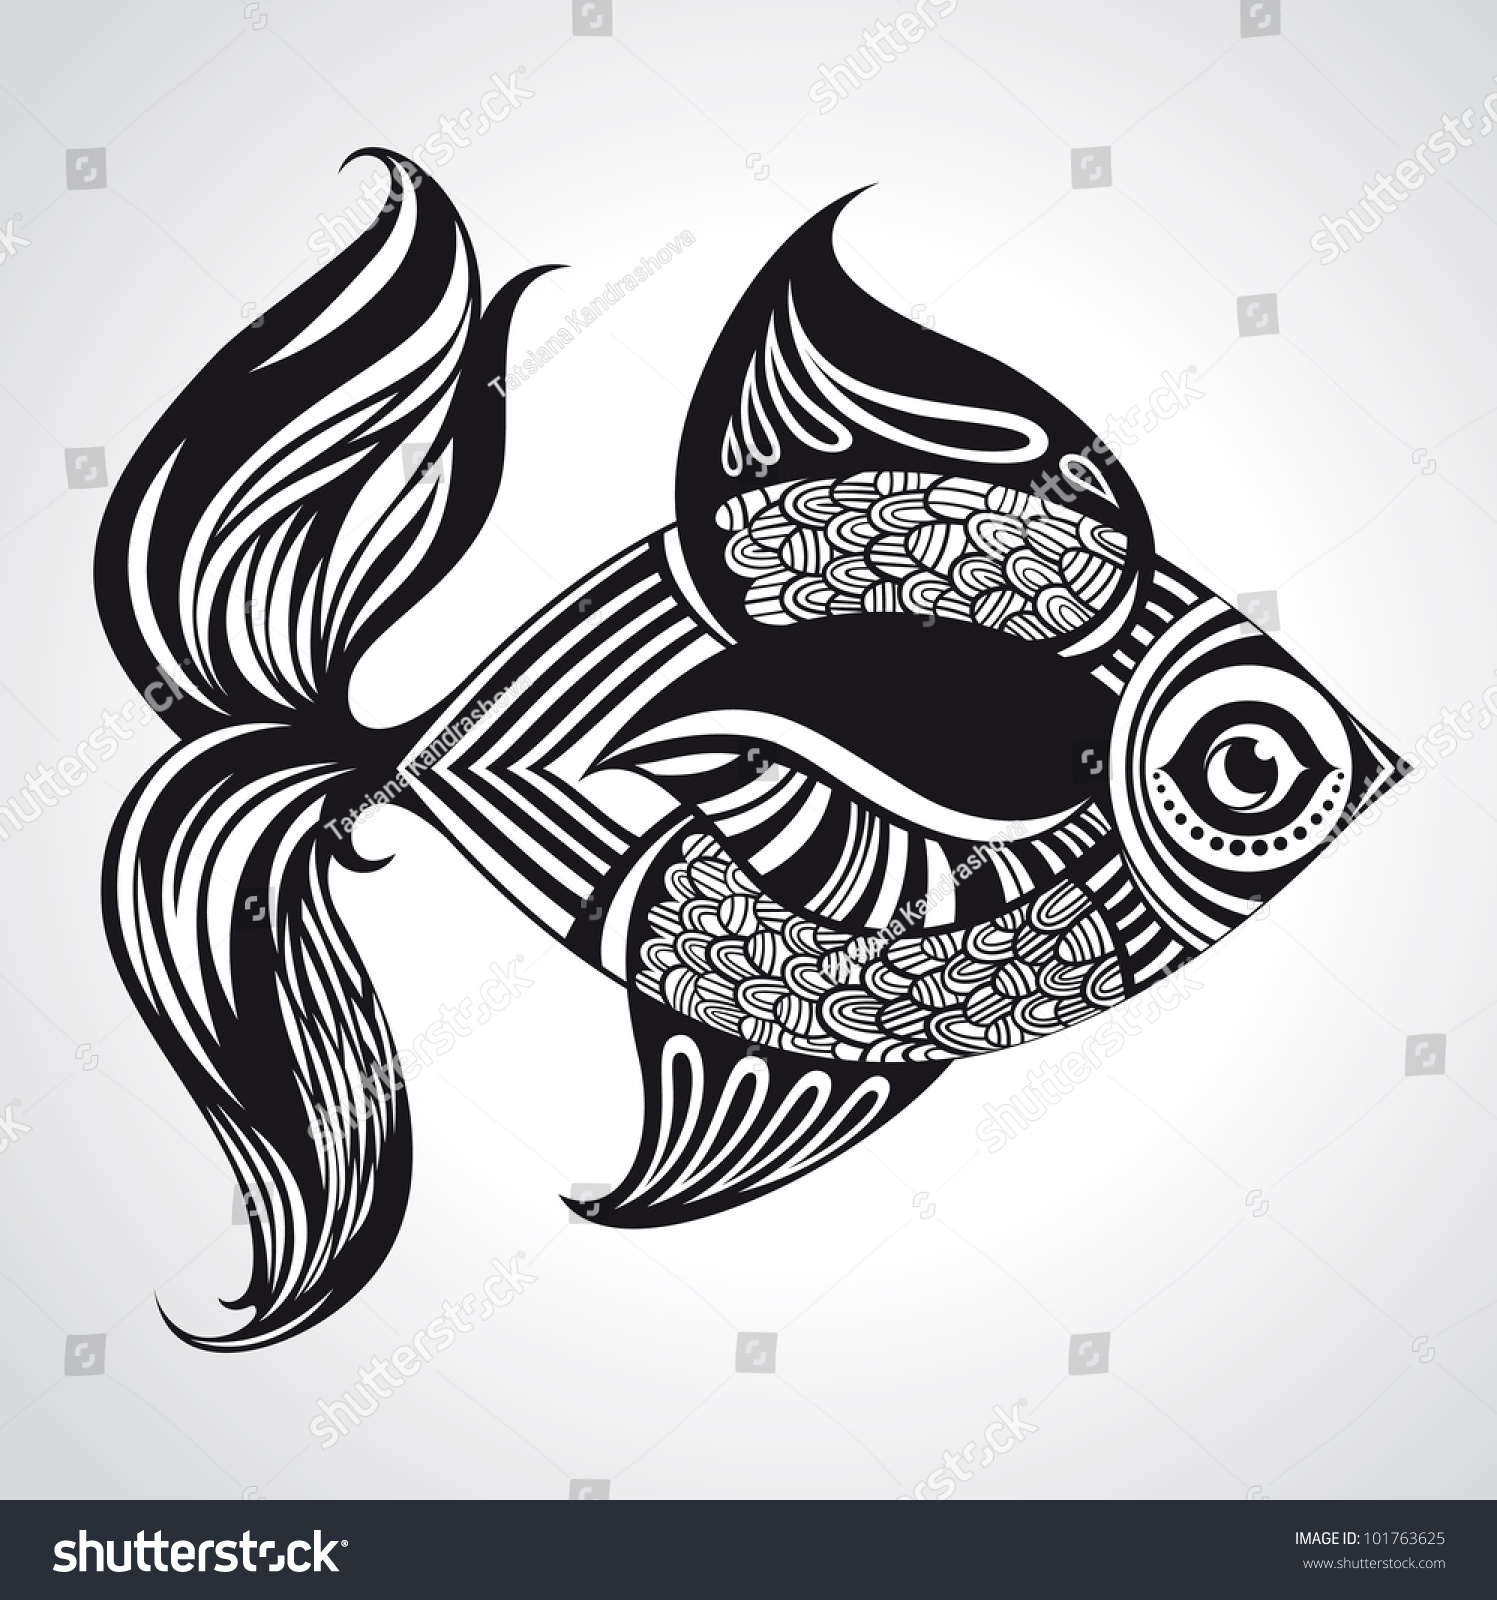 Abstract Vector Illustration Fish Graphic Design Stock Vector 101763625 ...